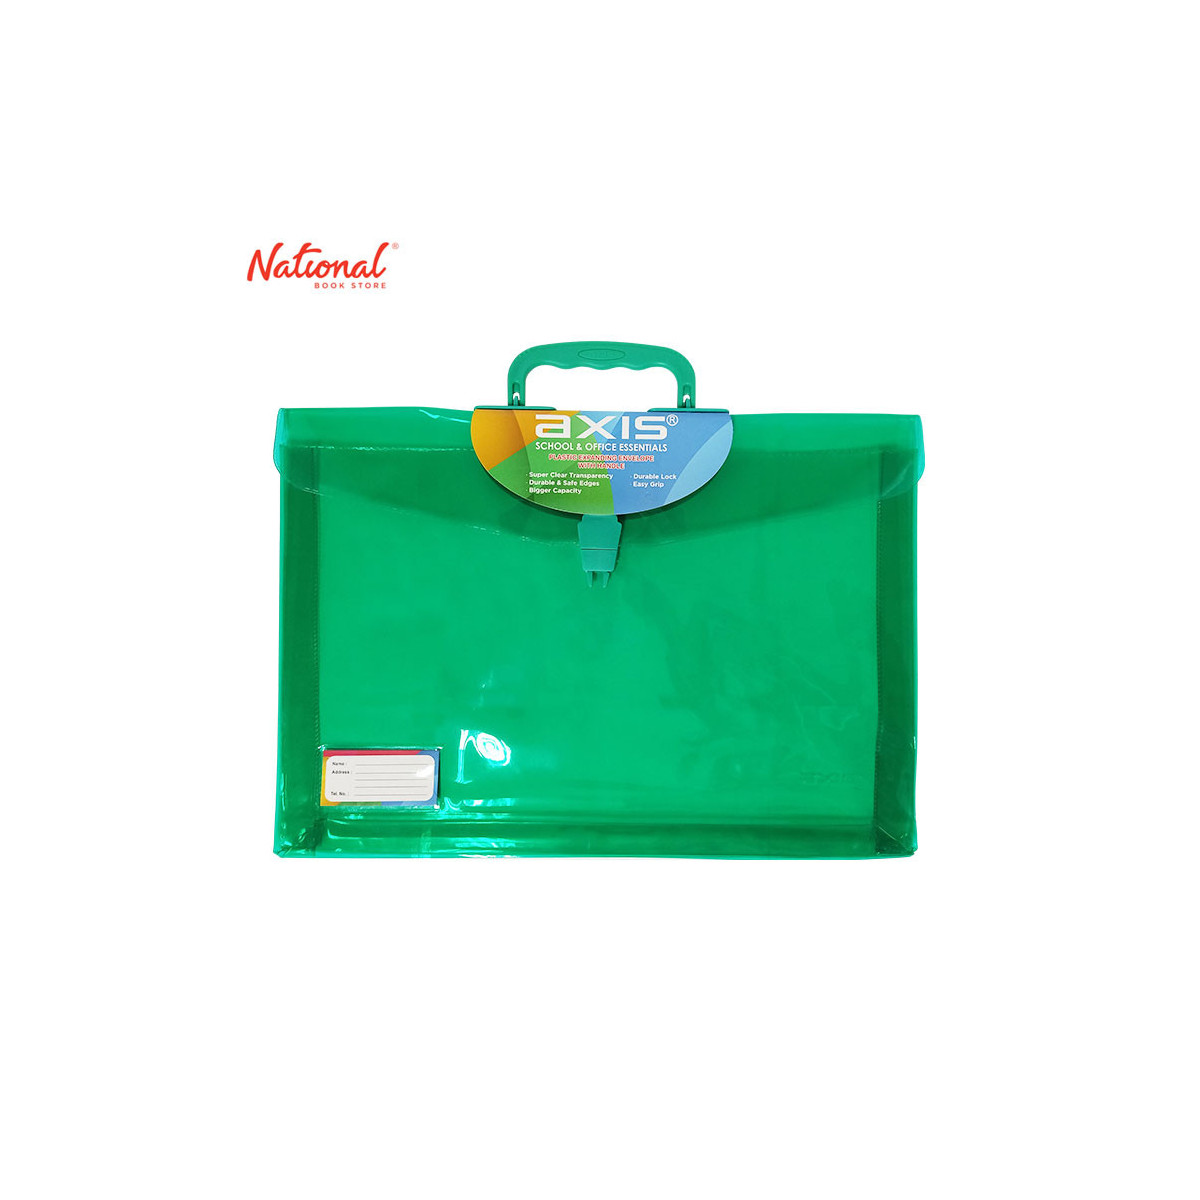 AXIS PLASTIC ENVELOPE WITH HANDLE AX-PEH002 LONG G10 COLORED TRANSPARENT PUSH LOCK EXPANDABLE, GREEN